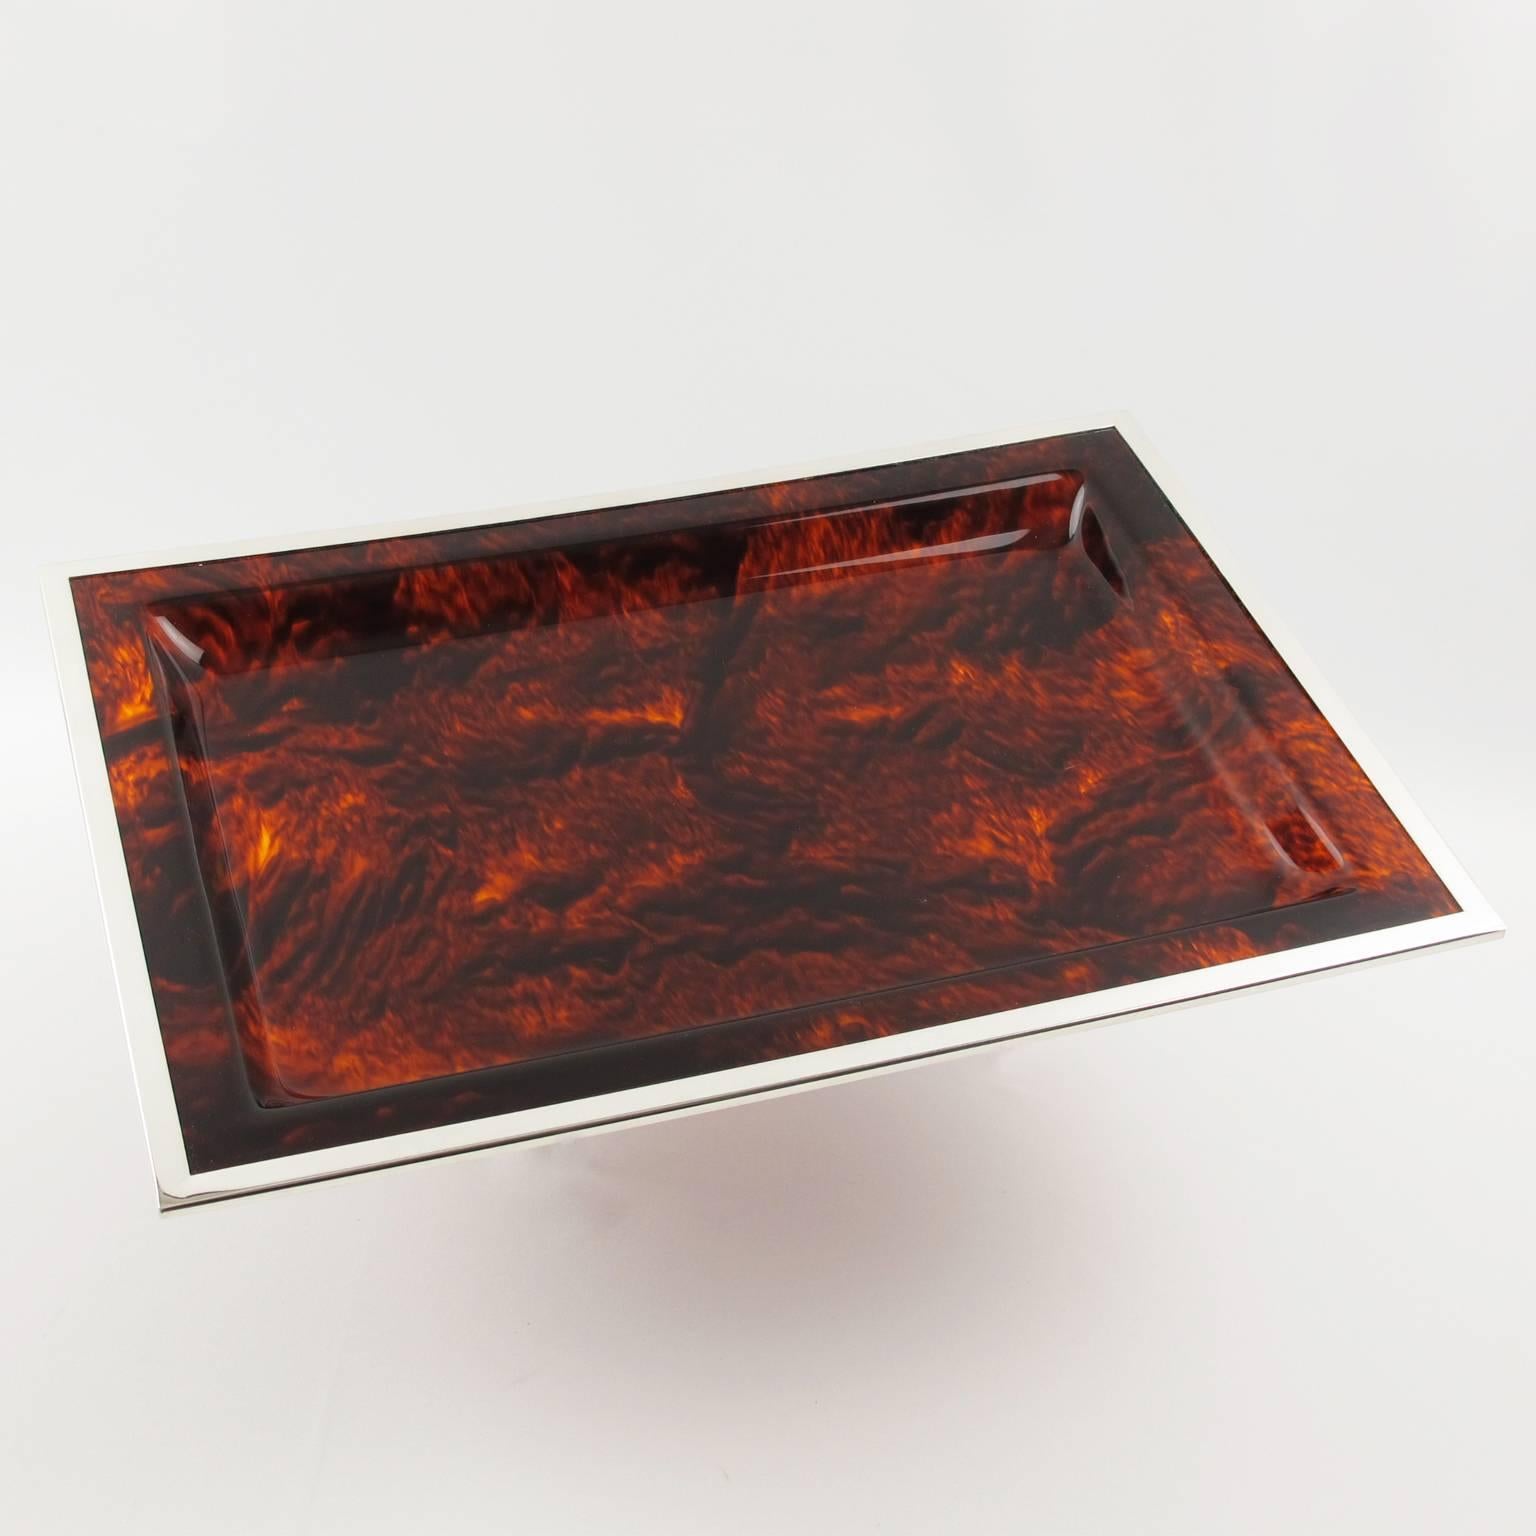 Stunning Mid-Century Modernist serving tray - platter for Christian Dior Home Collection, circa 1970s. Large rectangular shape with Lucite in faux tortoiseshell pattern and color and silver plate border. Excellent vintage condition.

Measurements: